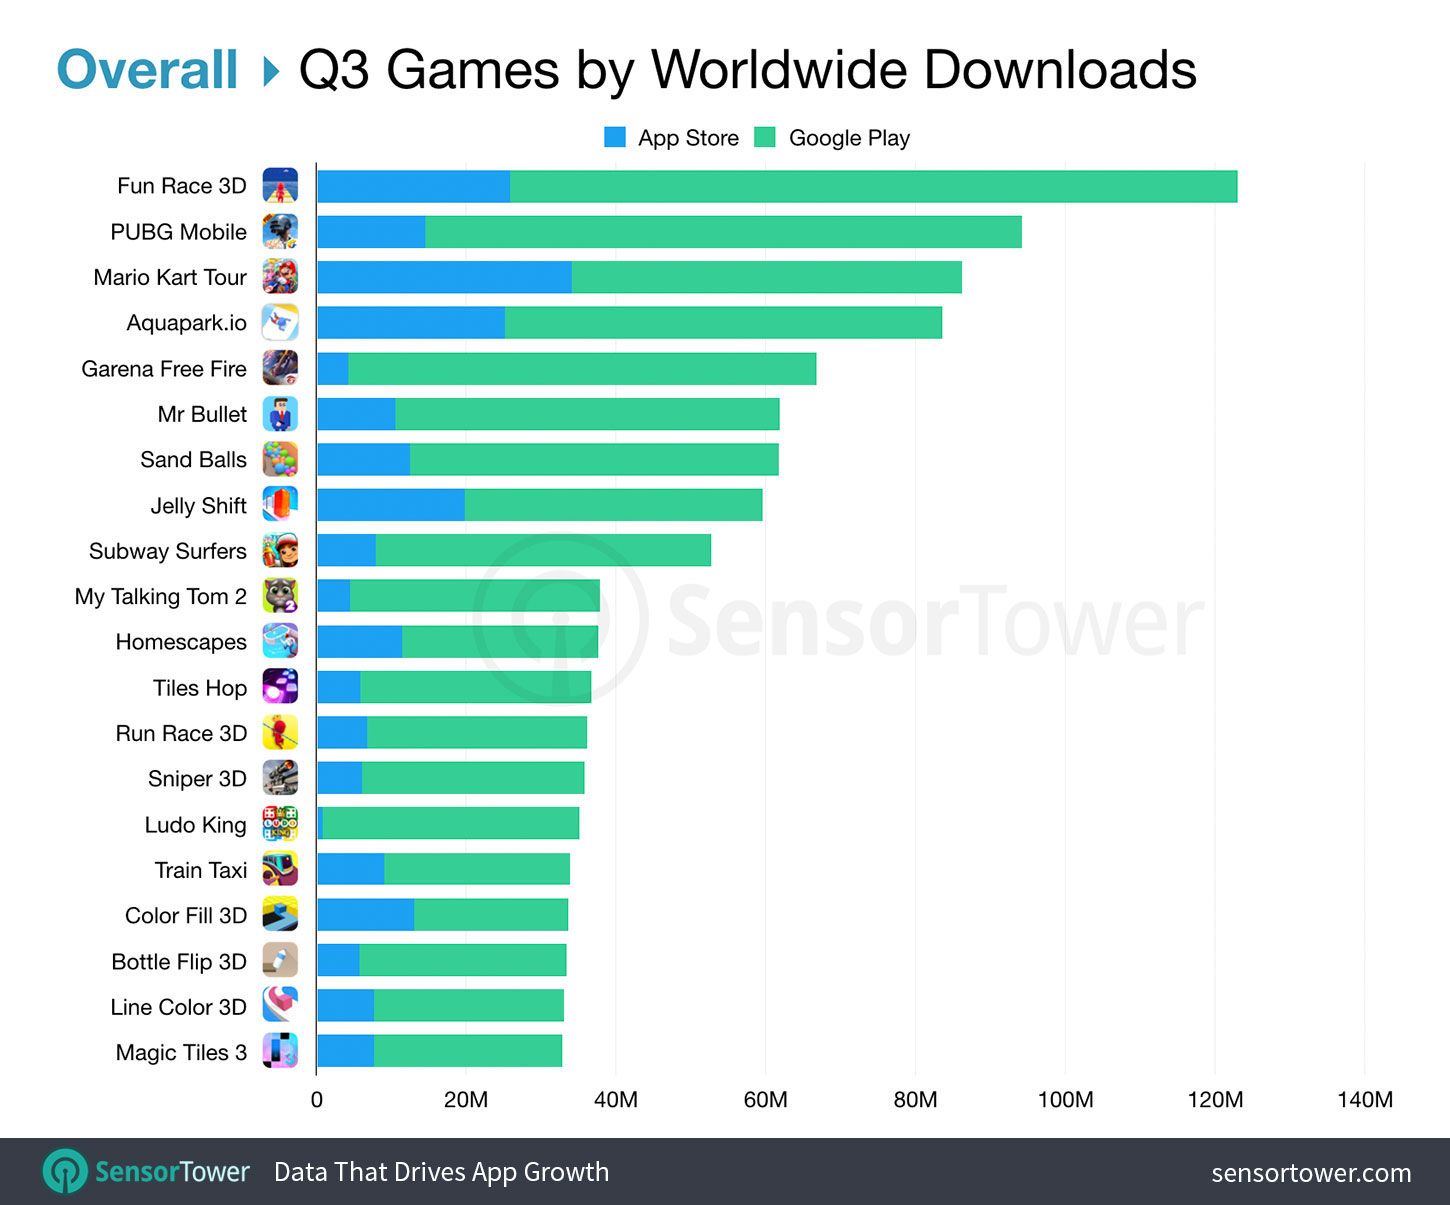 Pubg Mobile Was The Second Most Downloaded Mobile Game In Q3 Mmogames Com